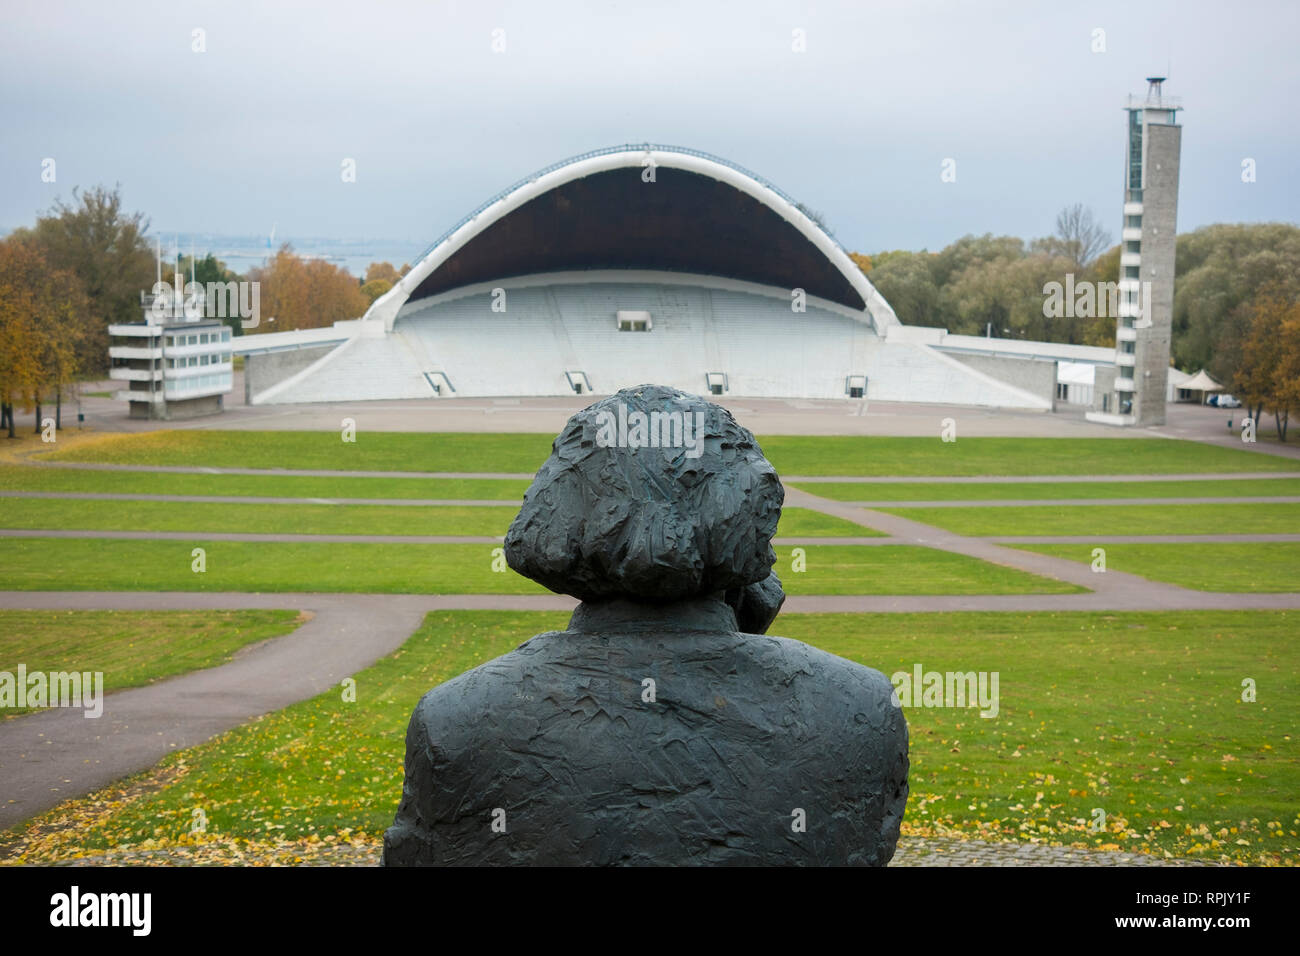 A view of the giant song festival ampitheater in Tallin, Estonia. Stock Photo